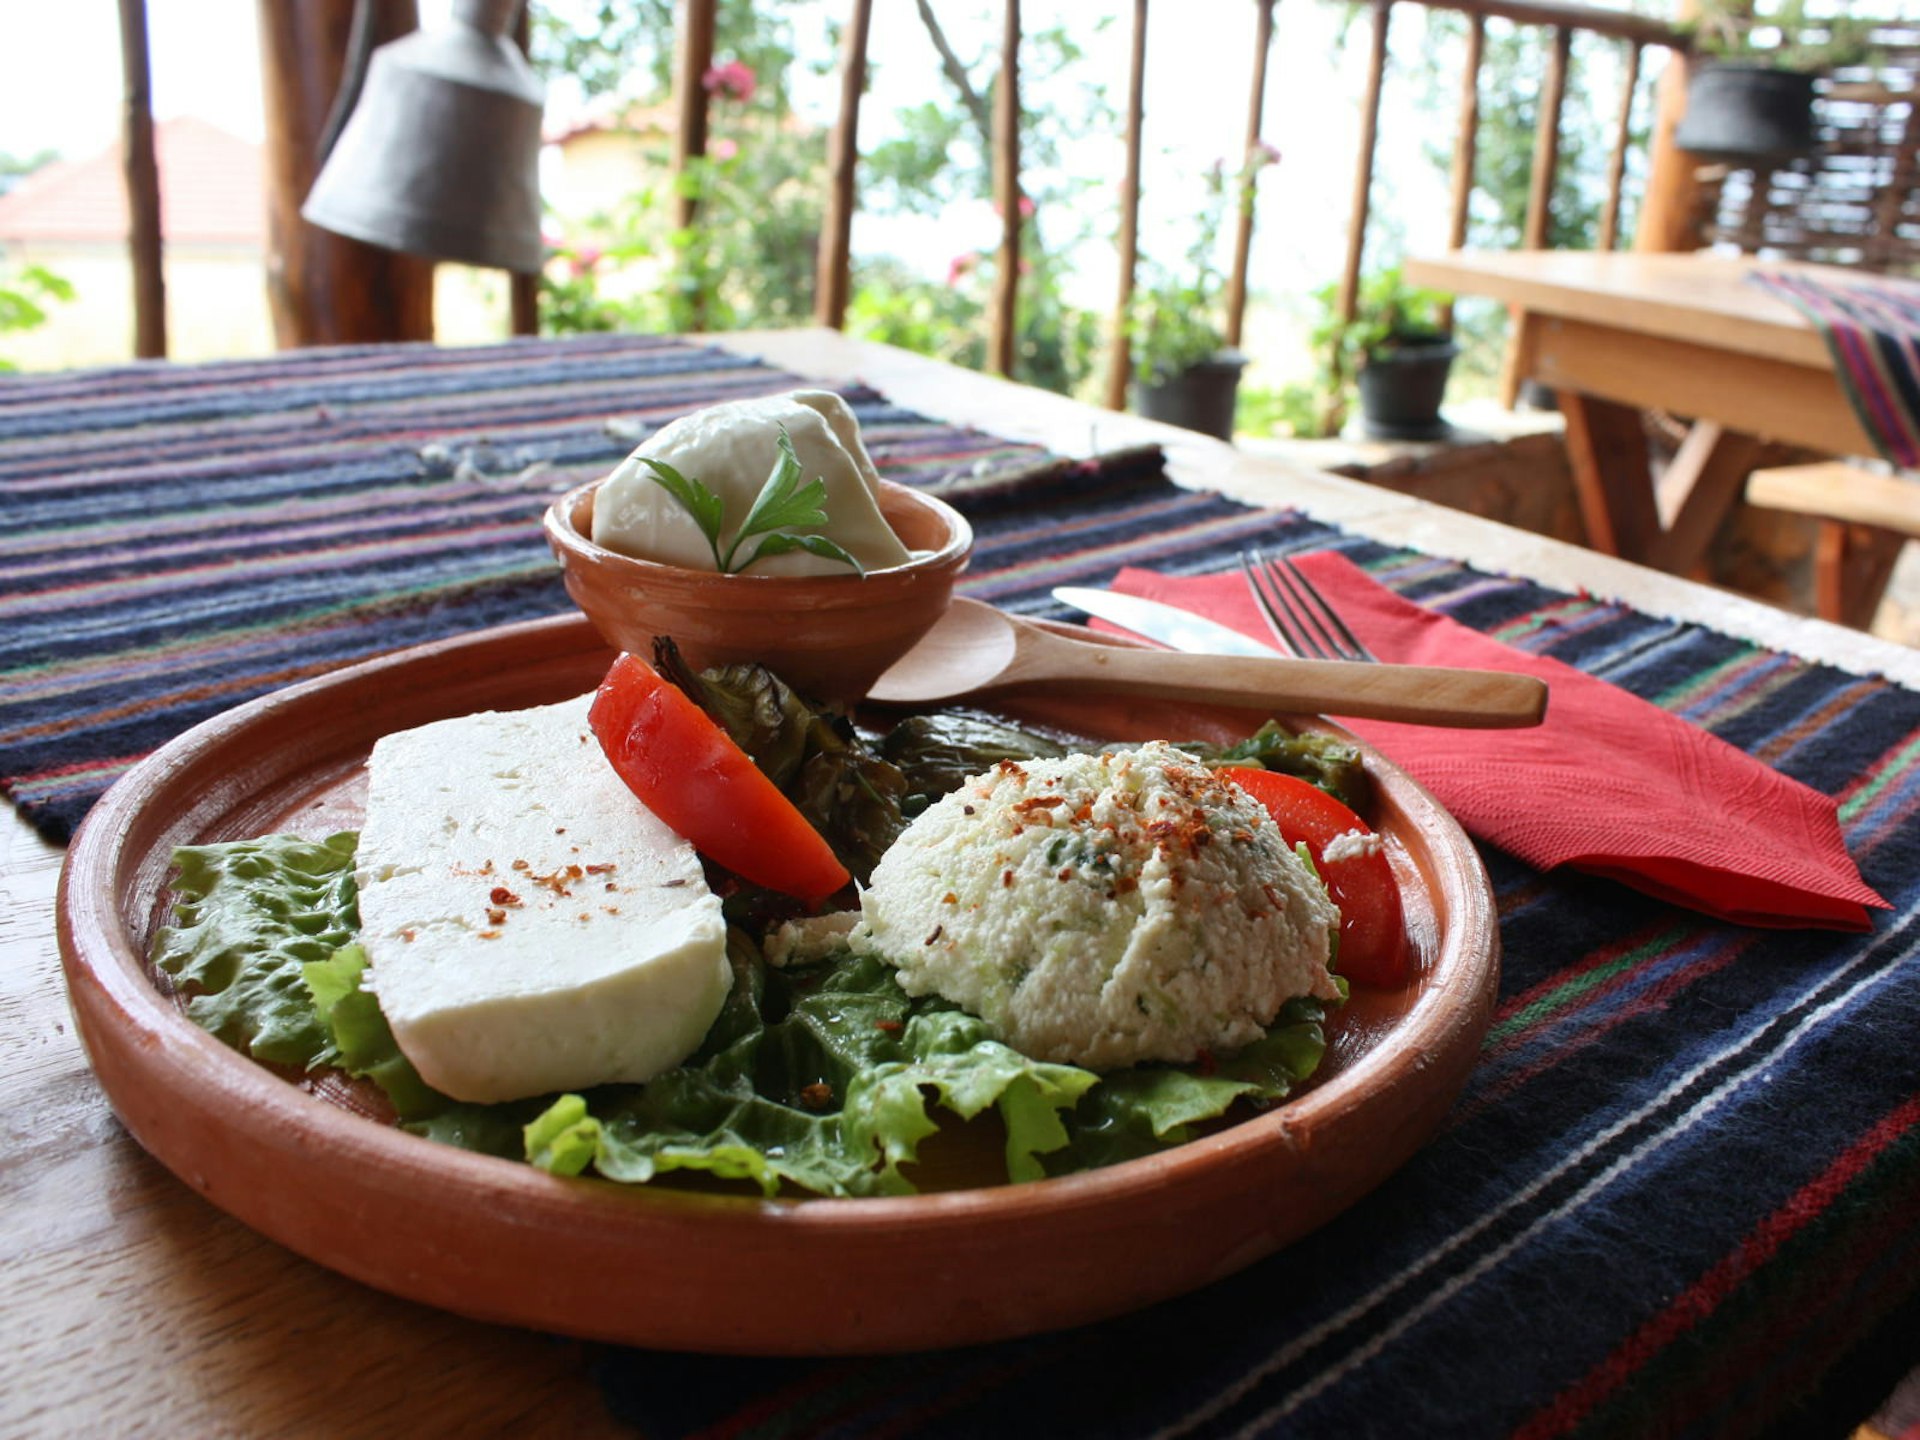 Cheese lunch in Galičica national park © Lorna Parkes / Lonely Planet